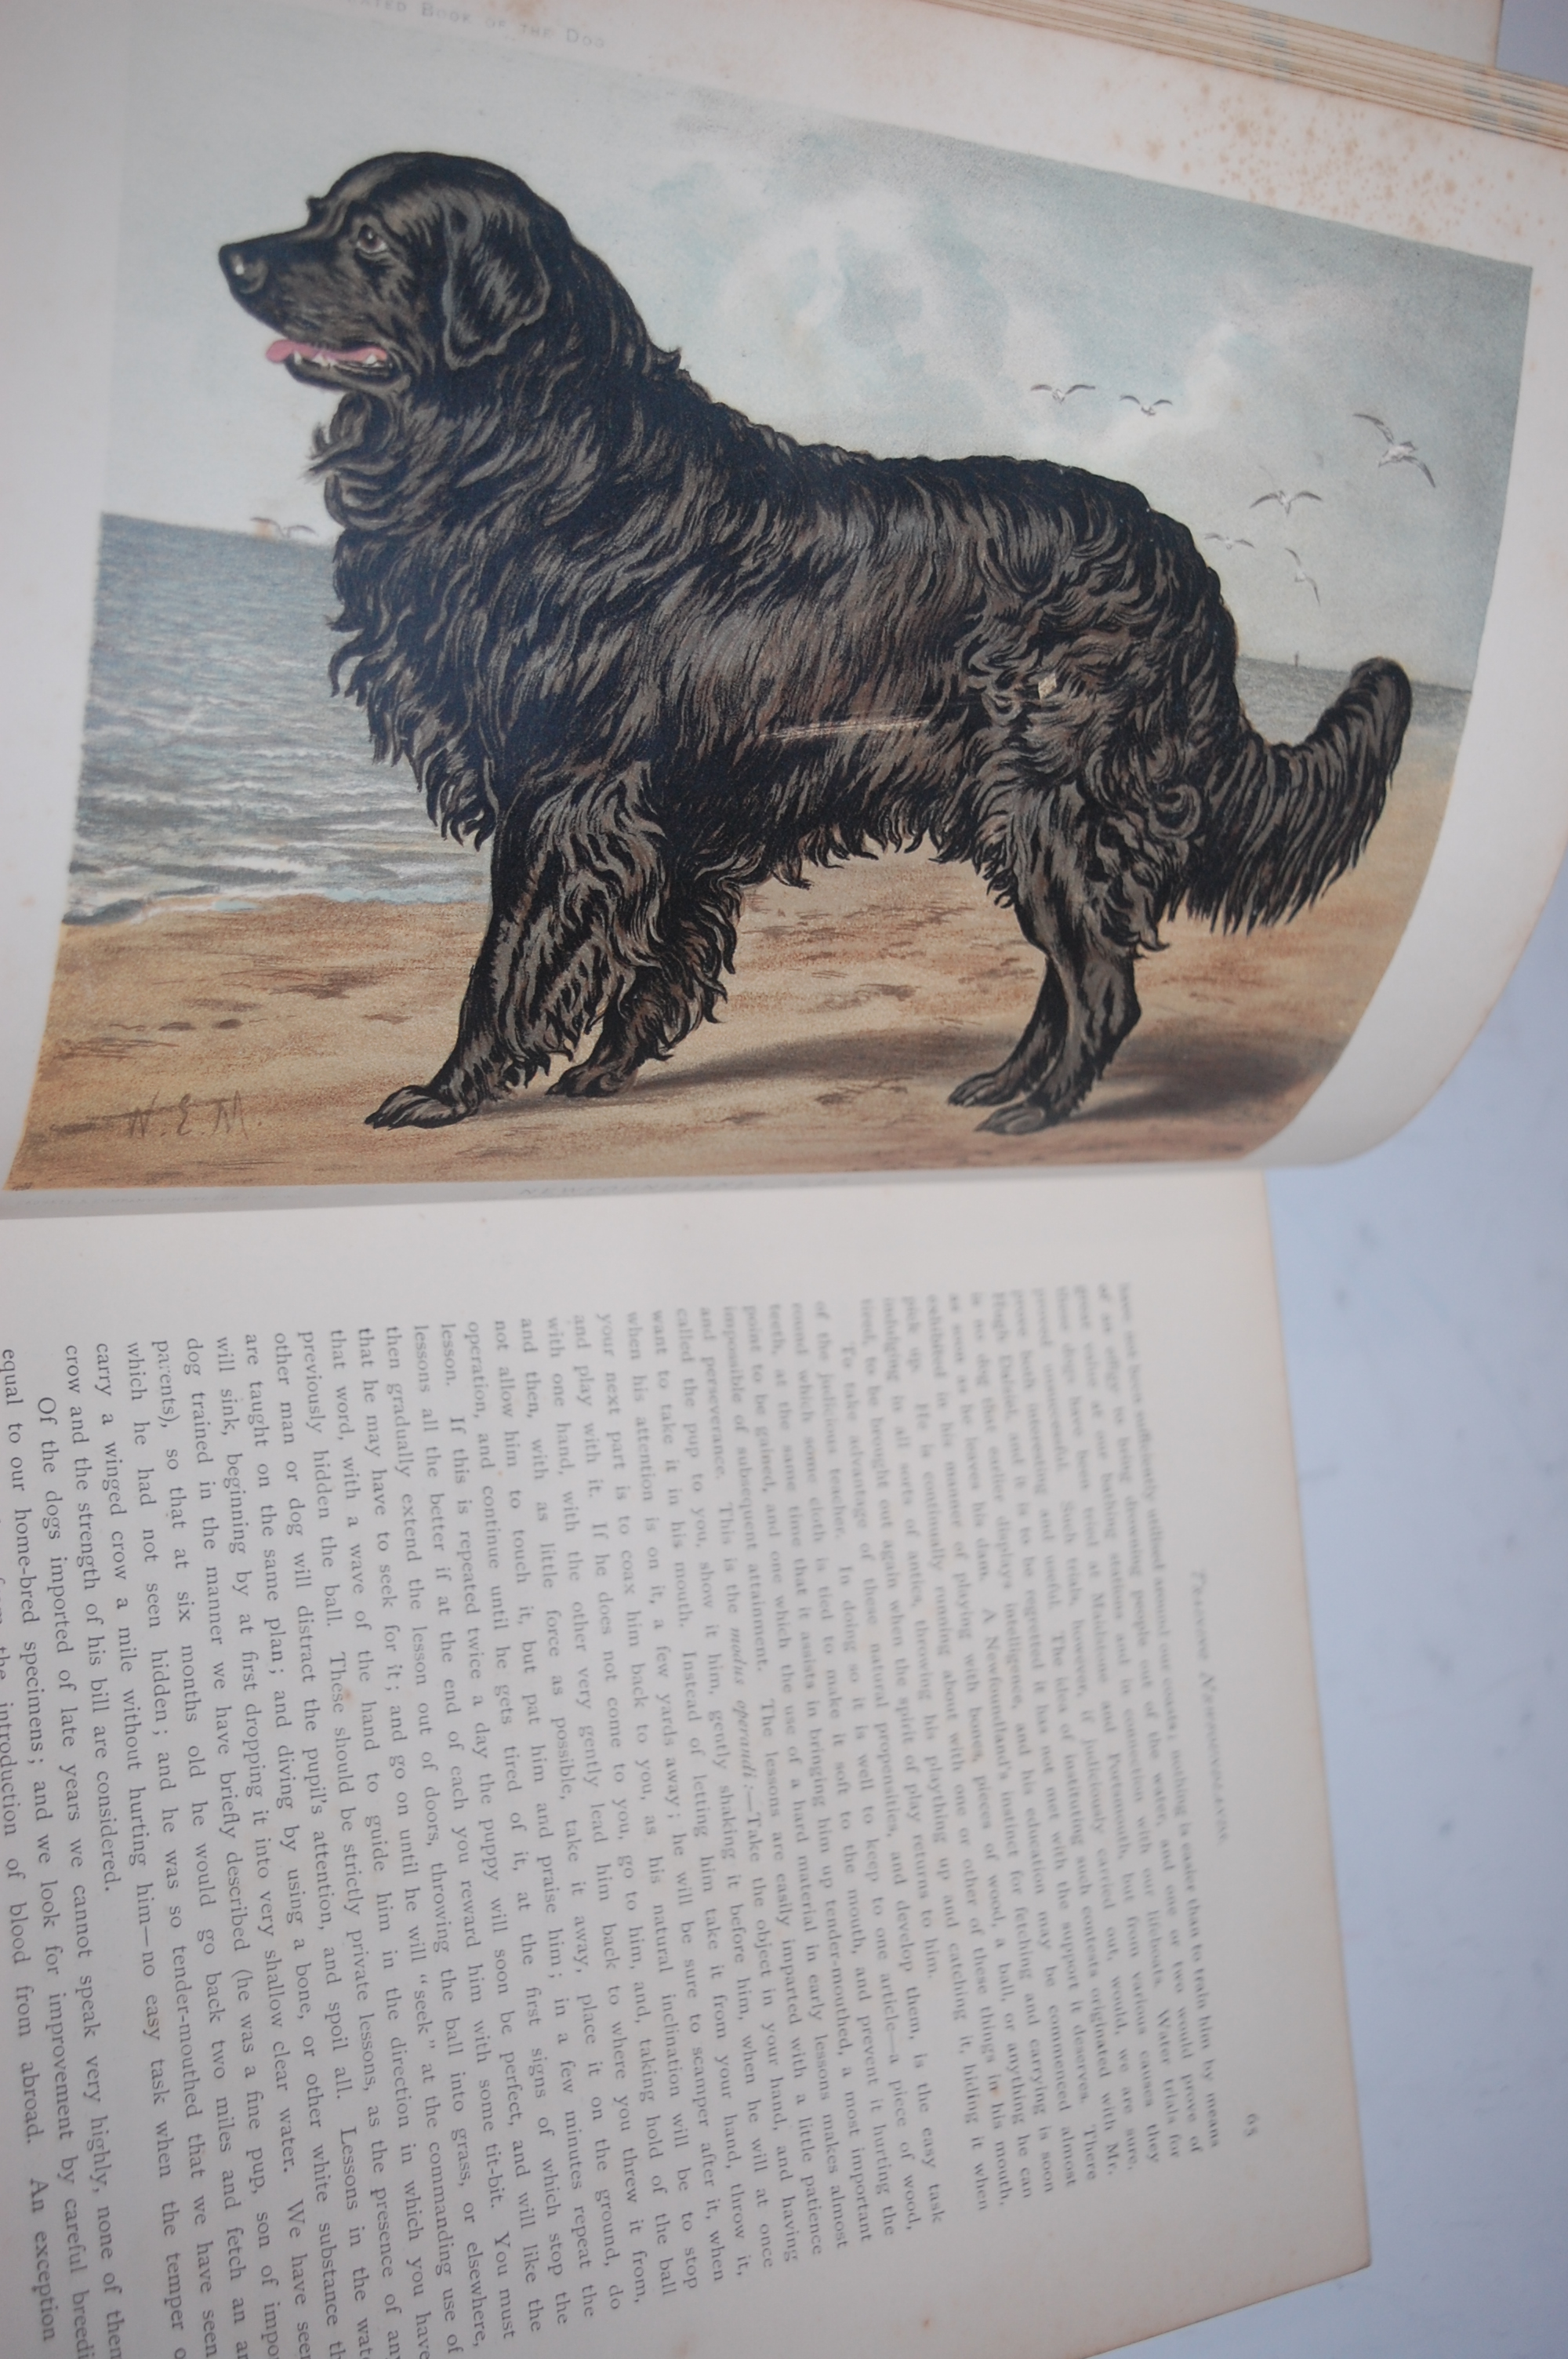 SHAW Vero, The Illustrated Book of the Dog, London, Cassell & Co, circa 1890, 4to, ½ calf, - Image 3 of 3